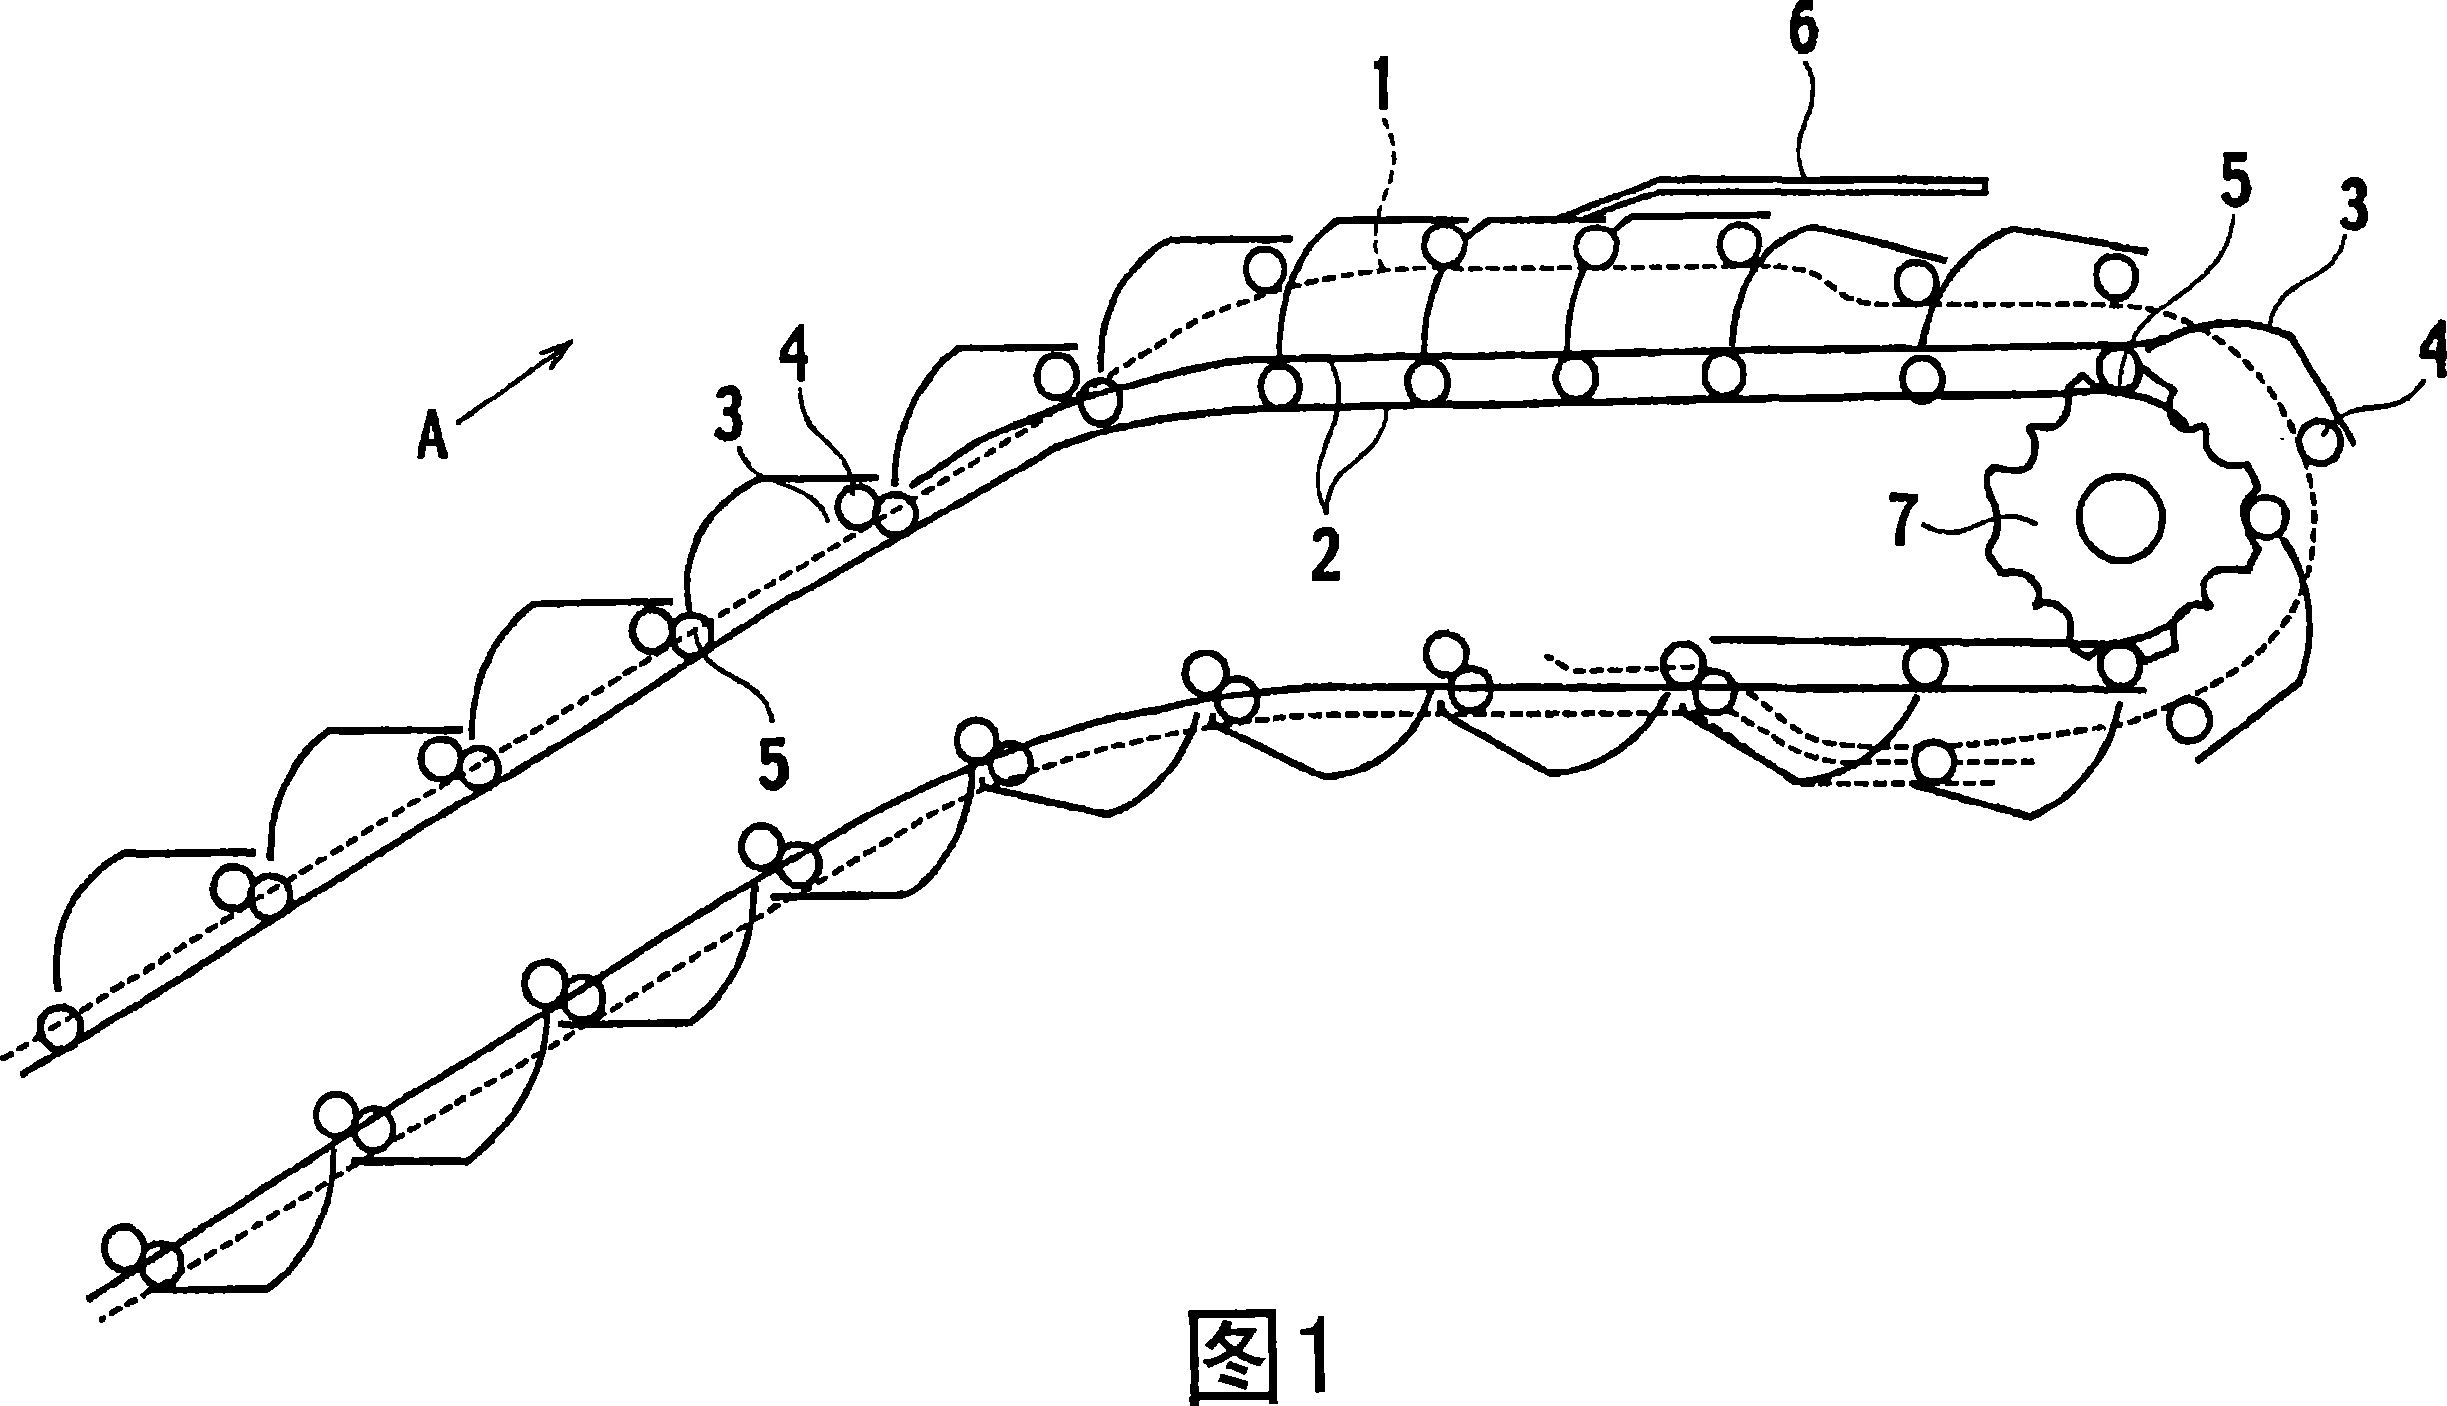 Escalator of type in which intermediate section thereof is accelerated